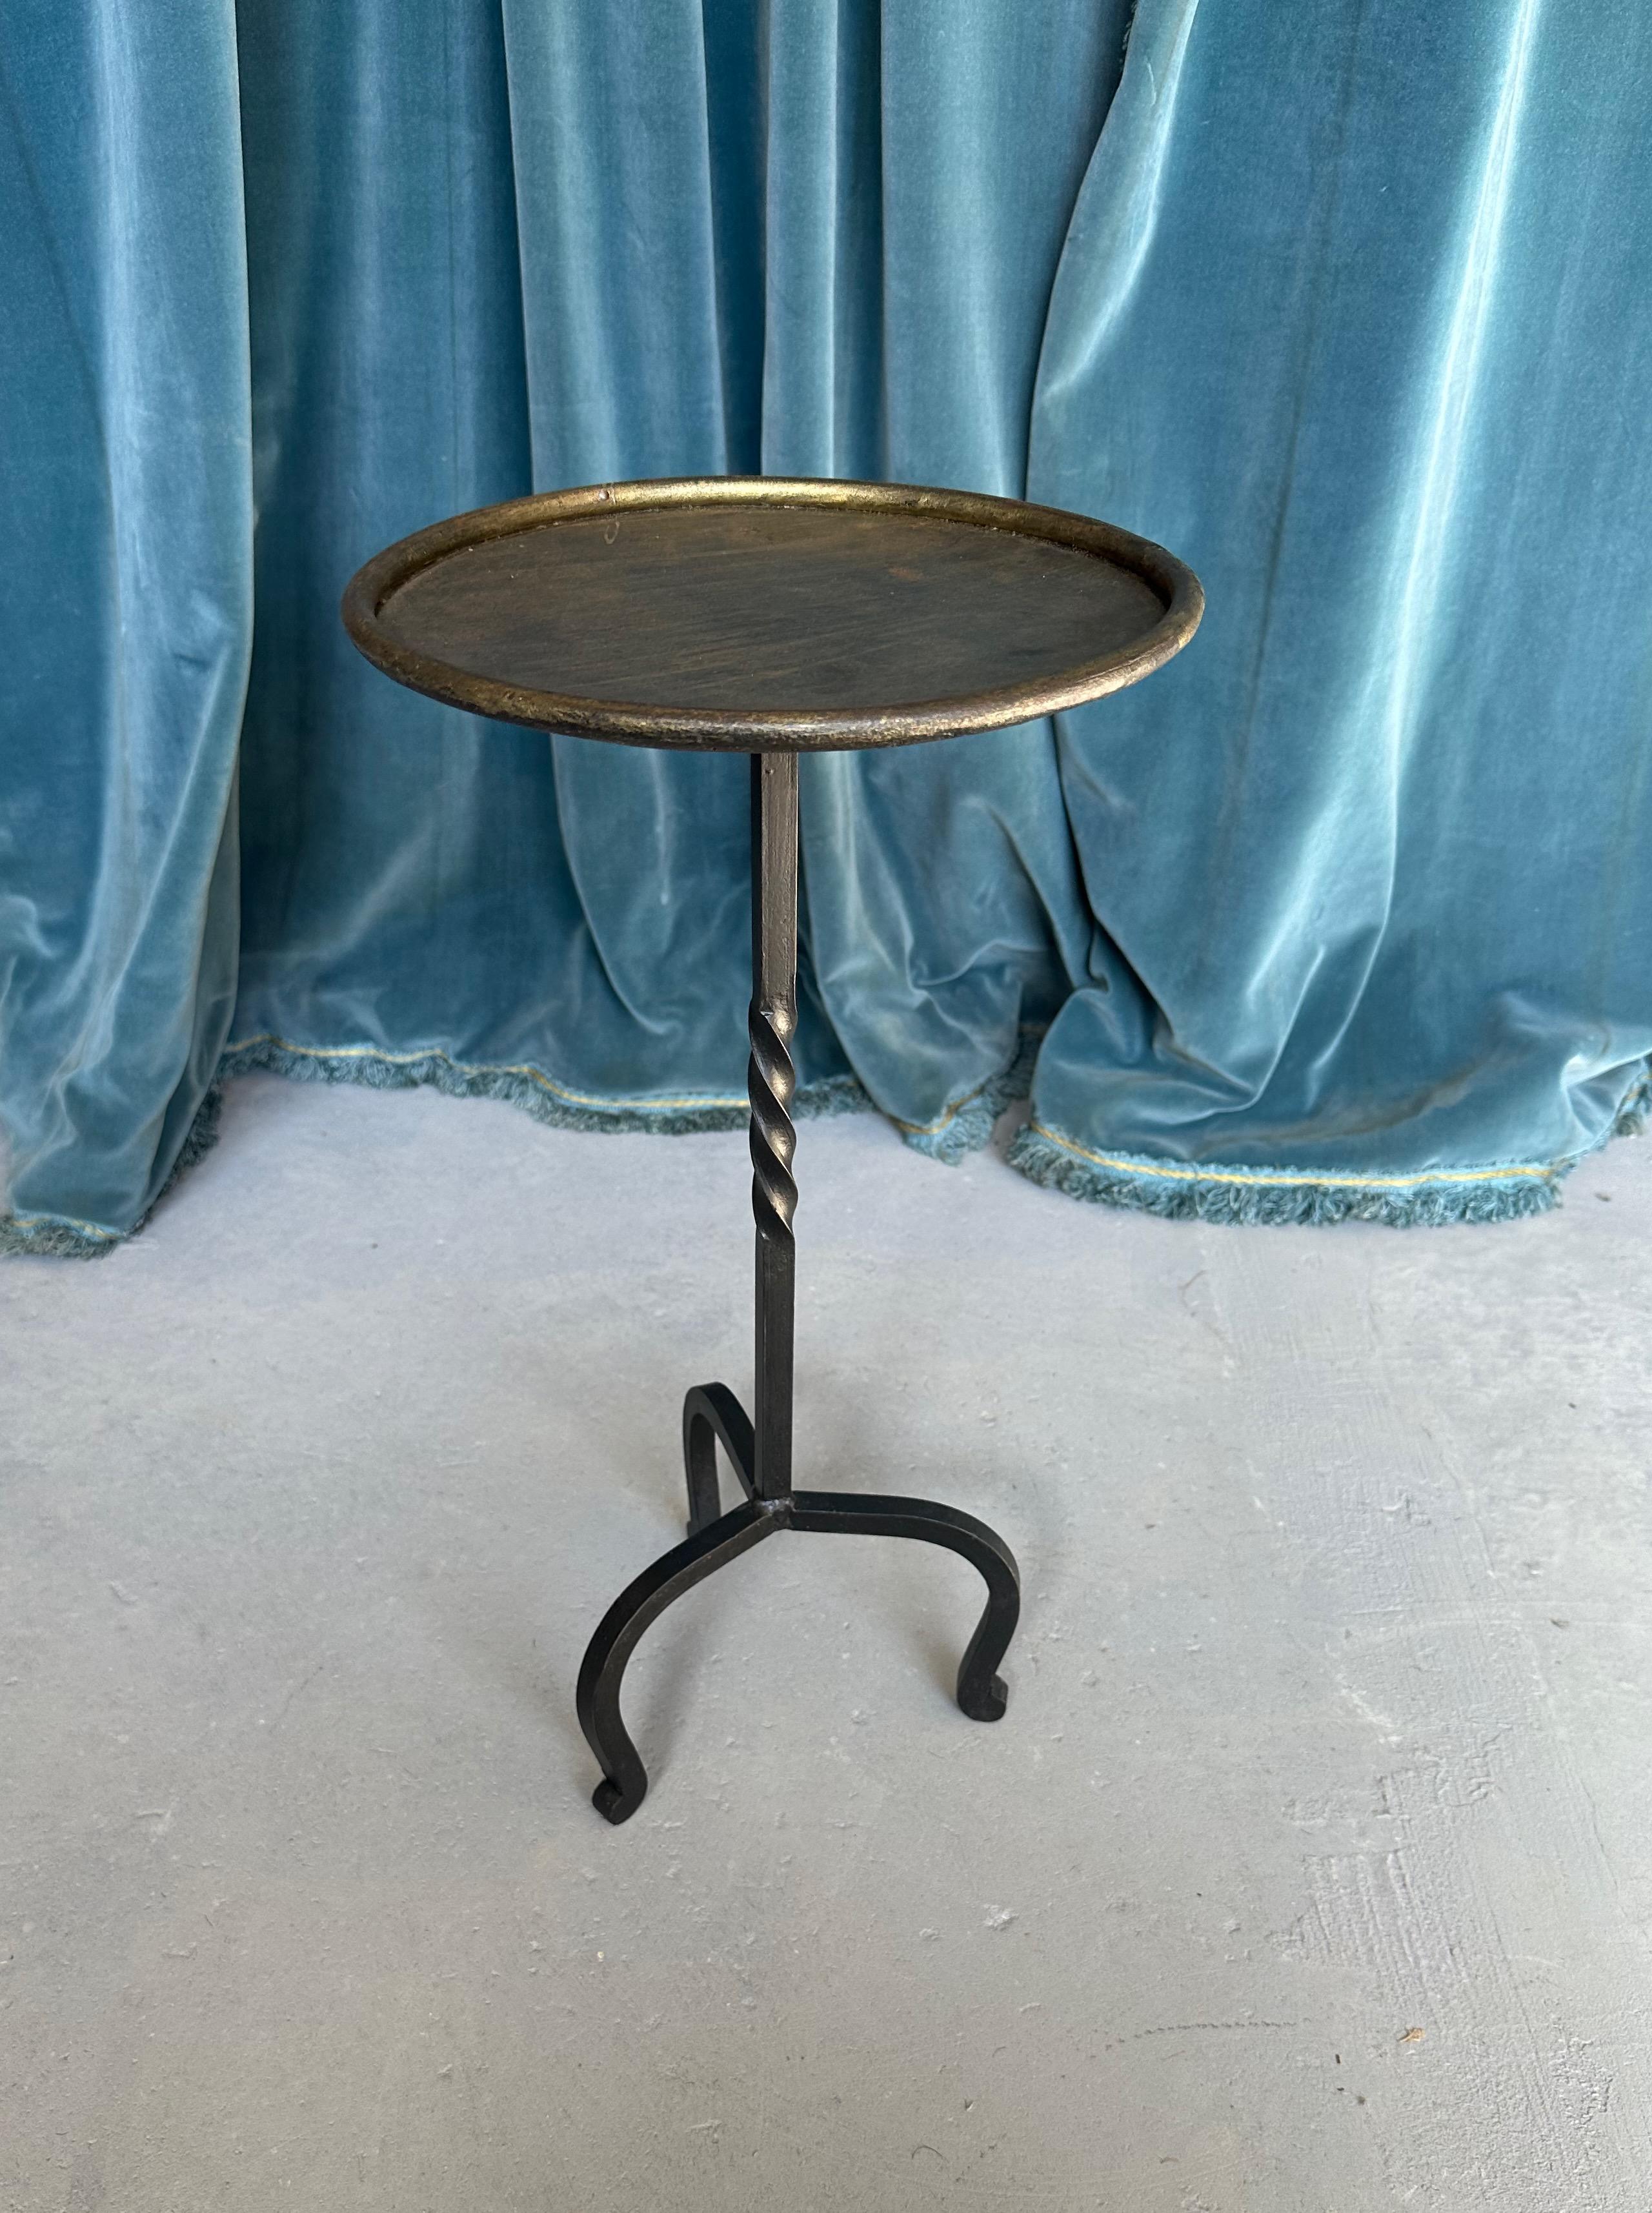 This striking Spanish drinks table was recently created by accomplished artisans using traditional iron-working methods with an emphasis on superior quality. Based on a 1950s design, the table boasts a captivating fusion of contrasting elements,